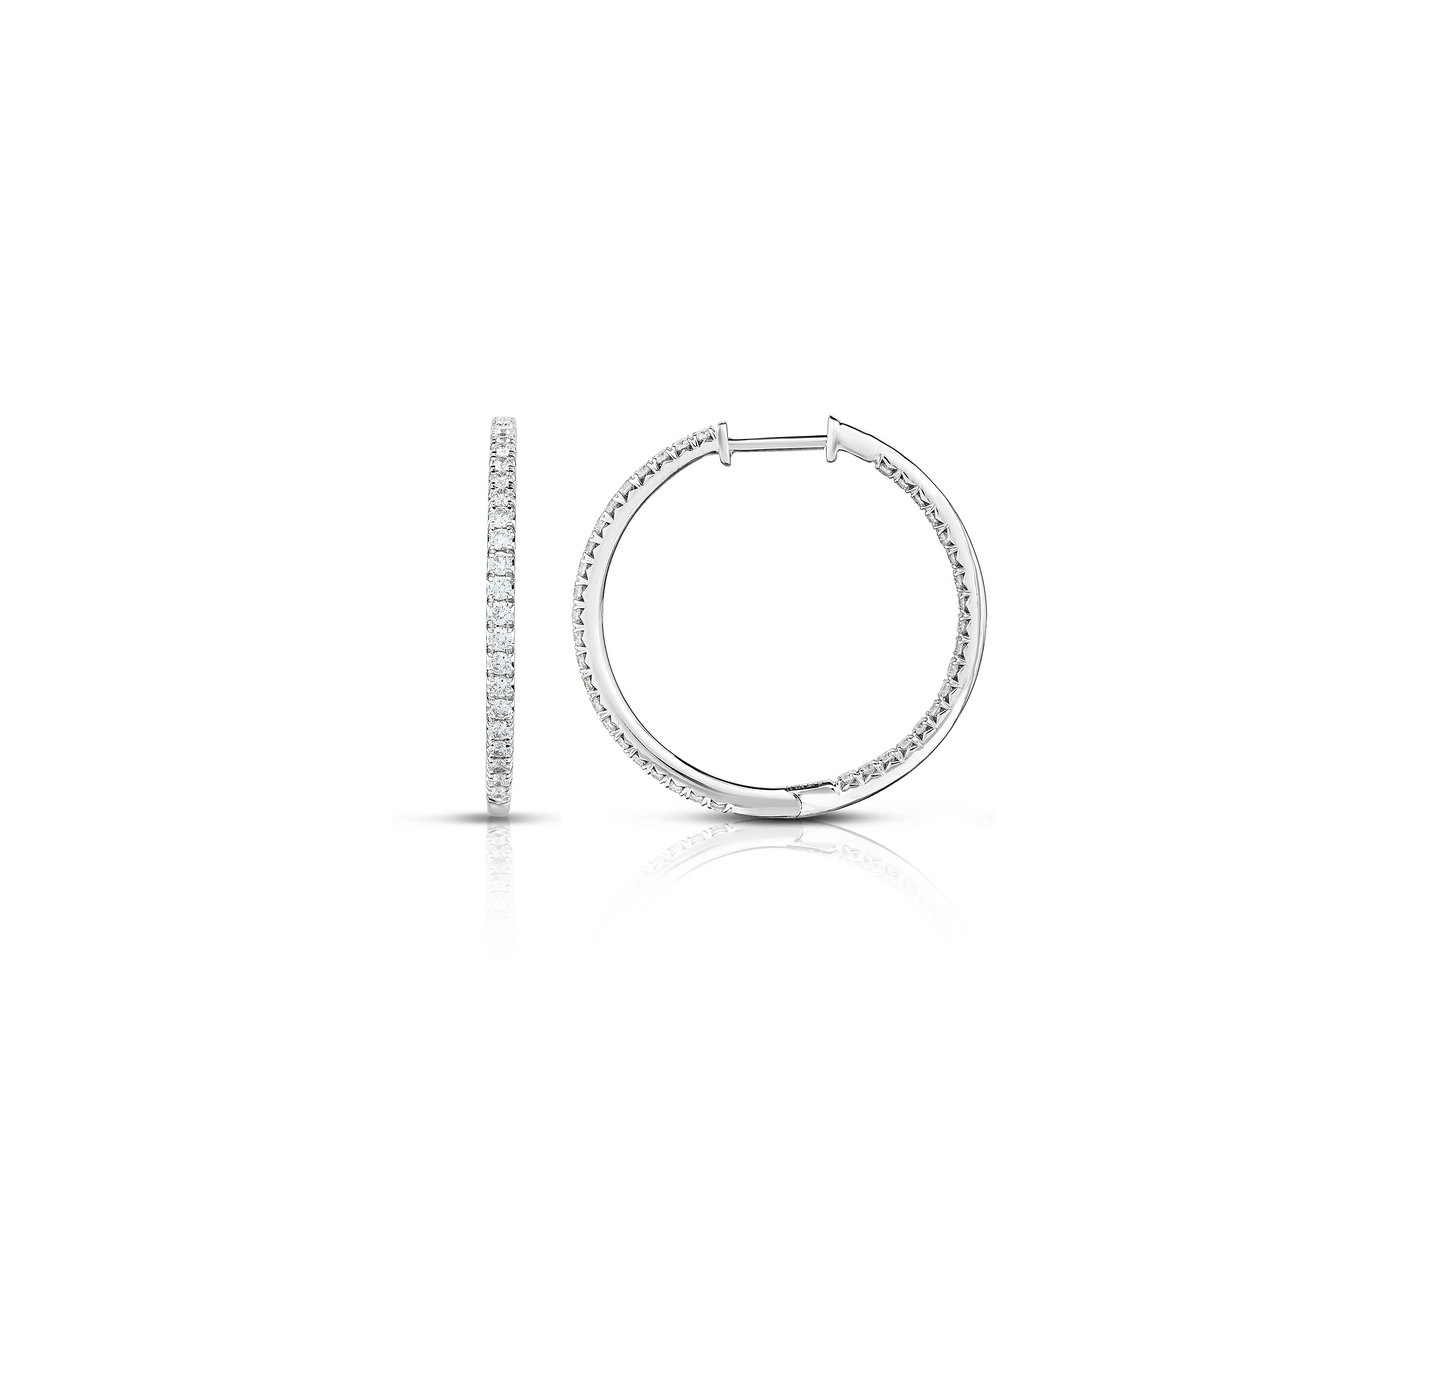 Sabel Collection White Gold Inside Out Diamond Hoop Earrings